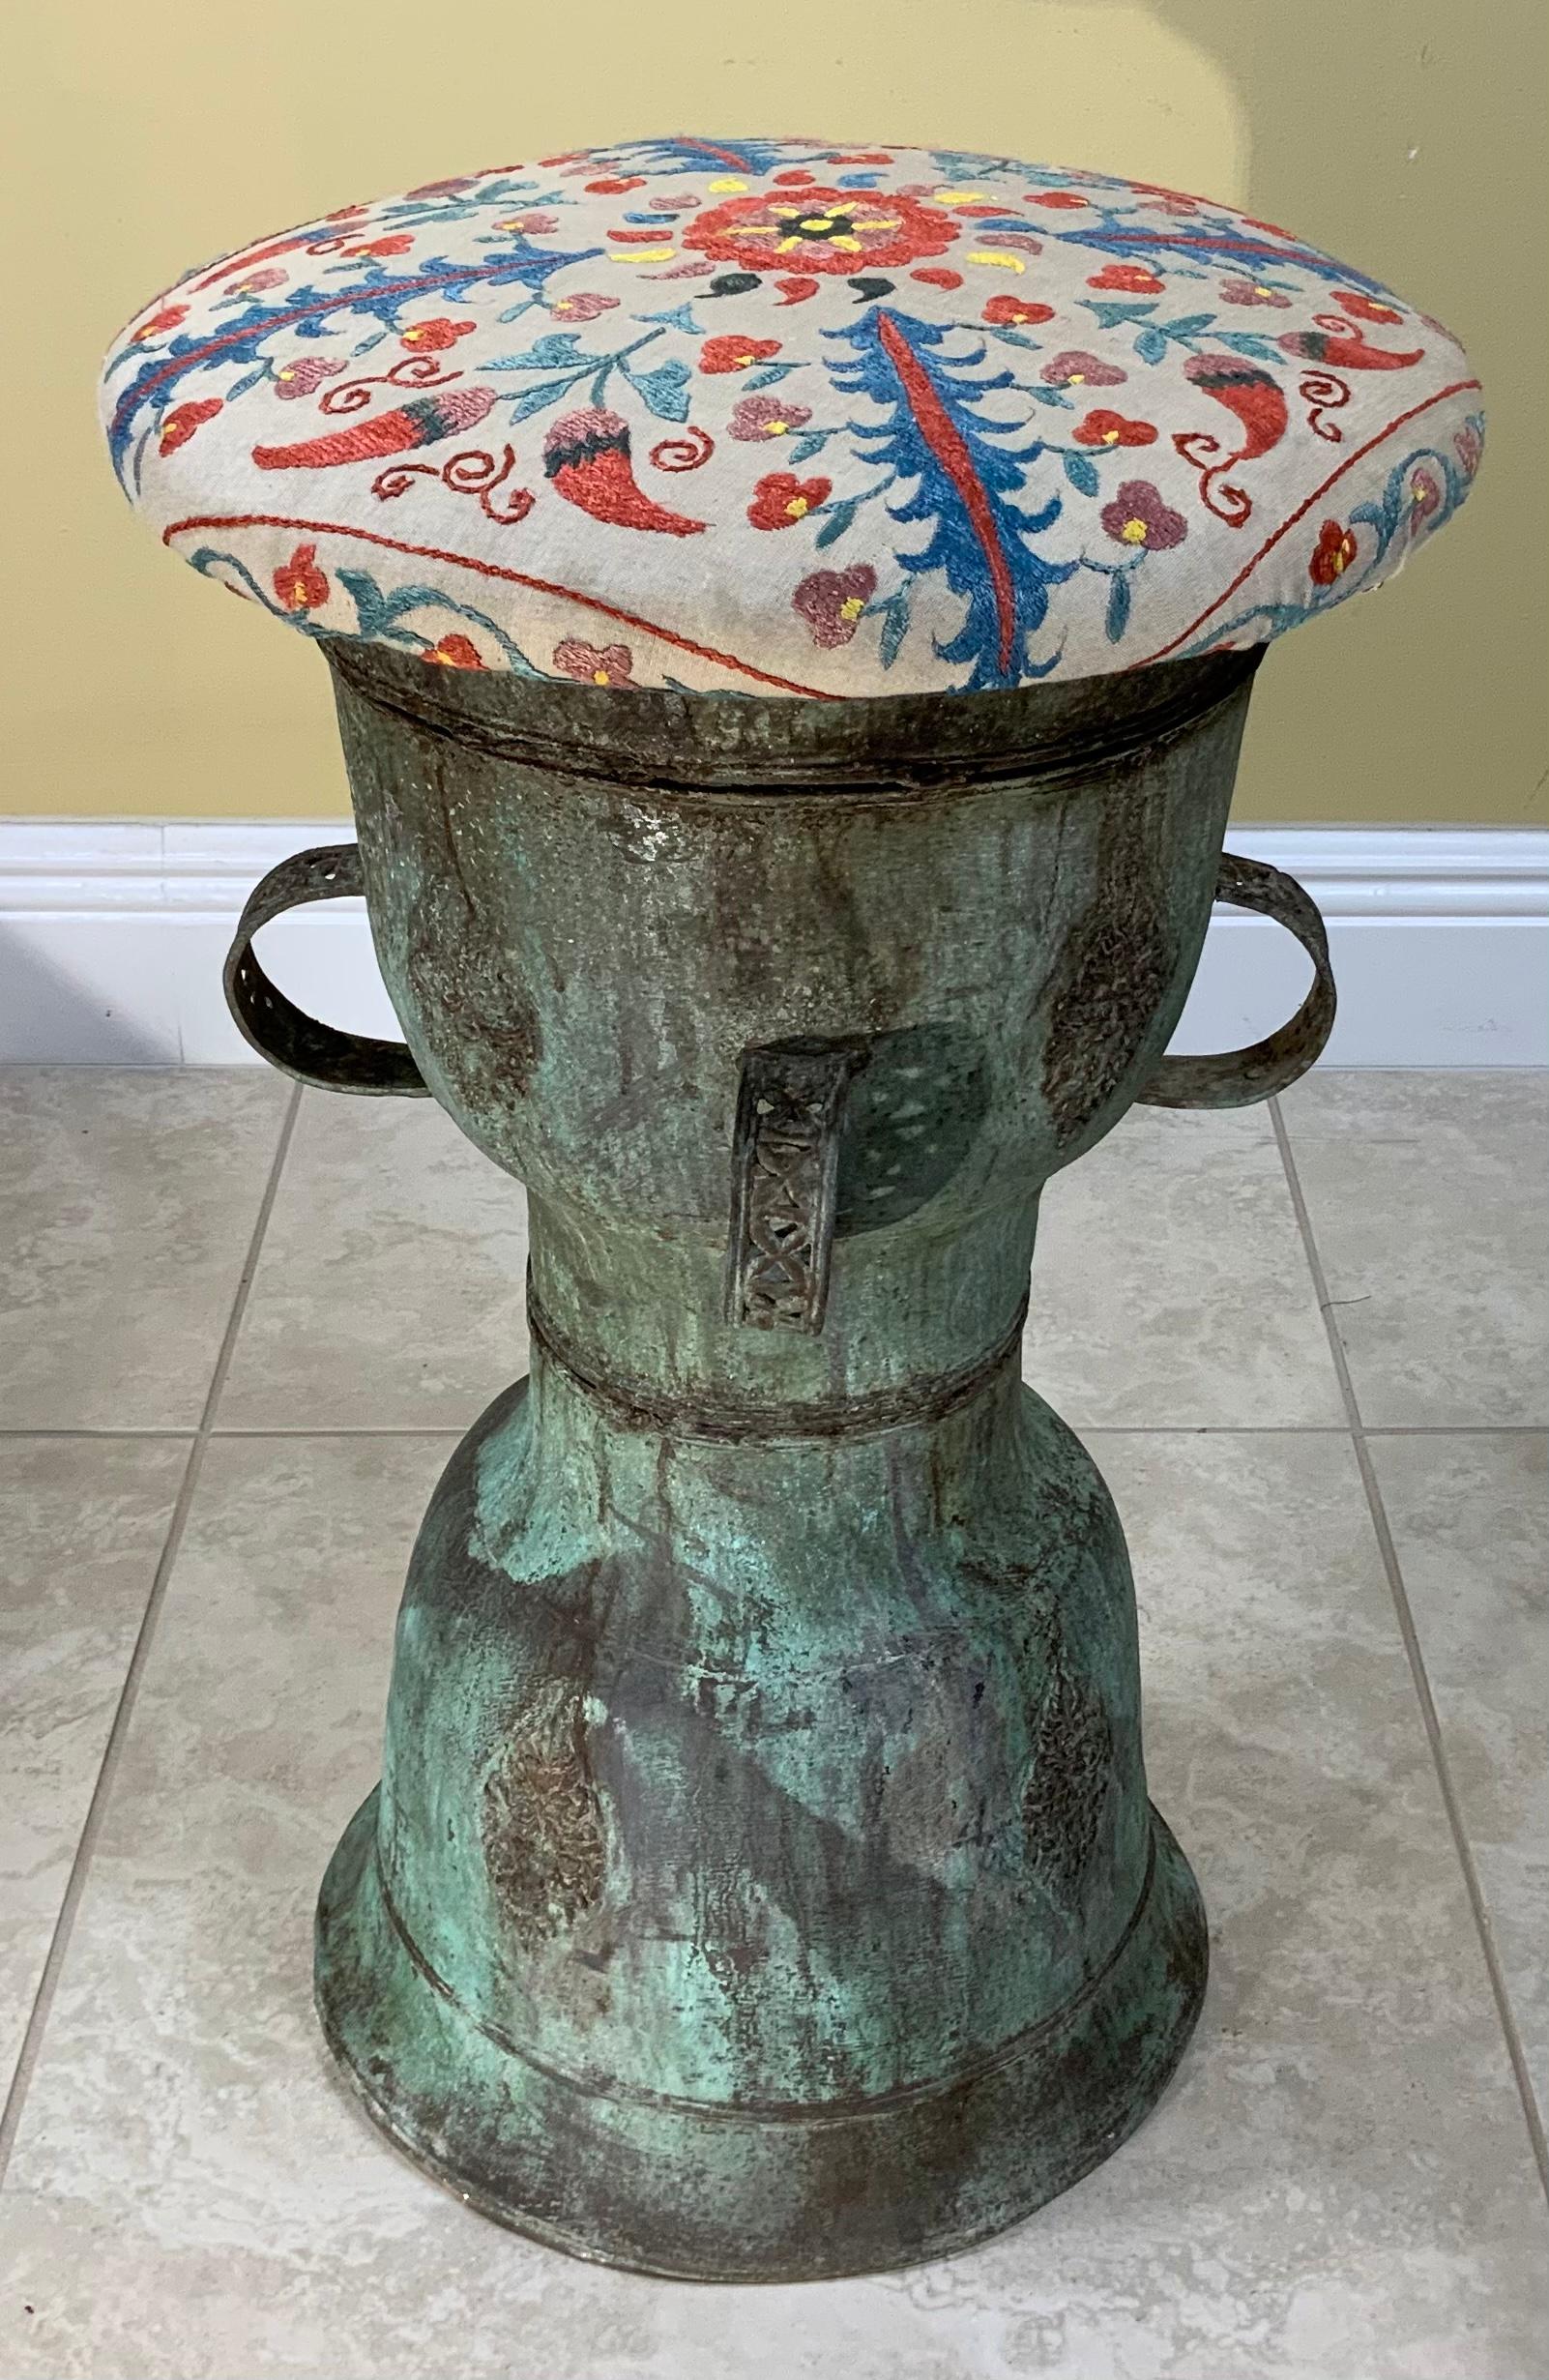 Exceptional stool artistically made of hand embroidery vintage silk embroidery Suzani textile top, professionally mounted on antique bronze antique Chinese rain drum base, with four decorative handles. Beautiful object of art for room display. Base